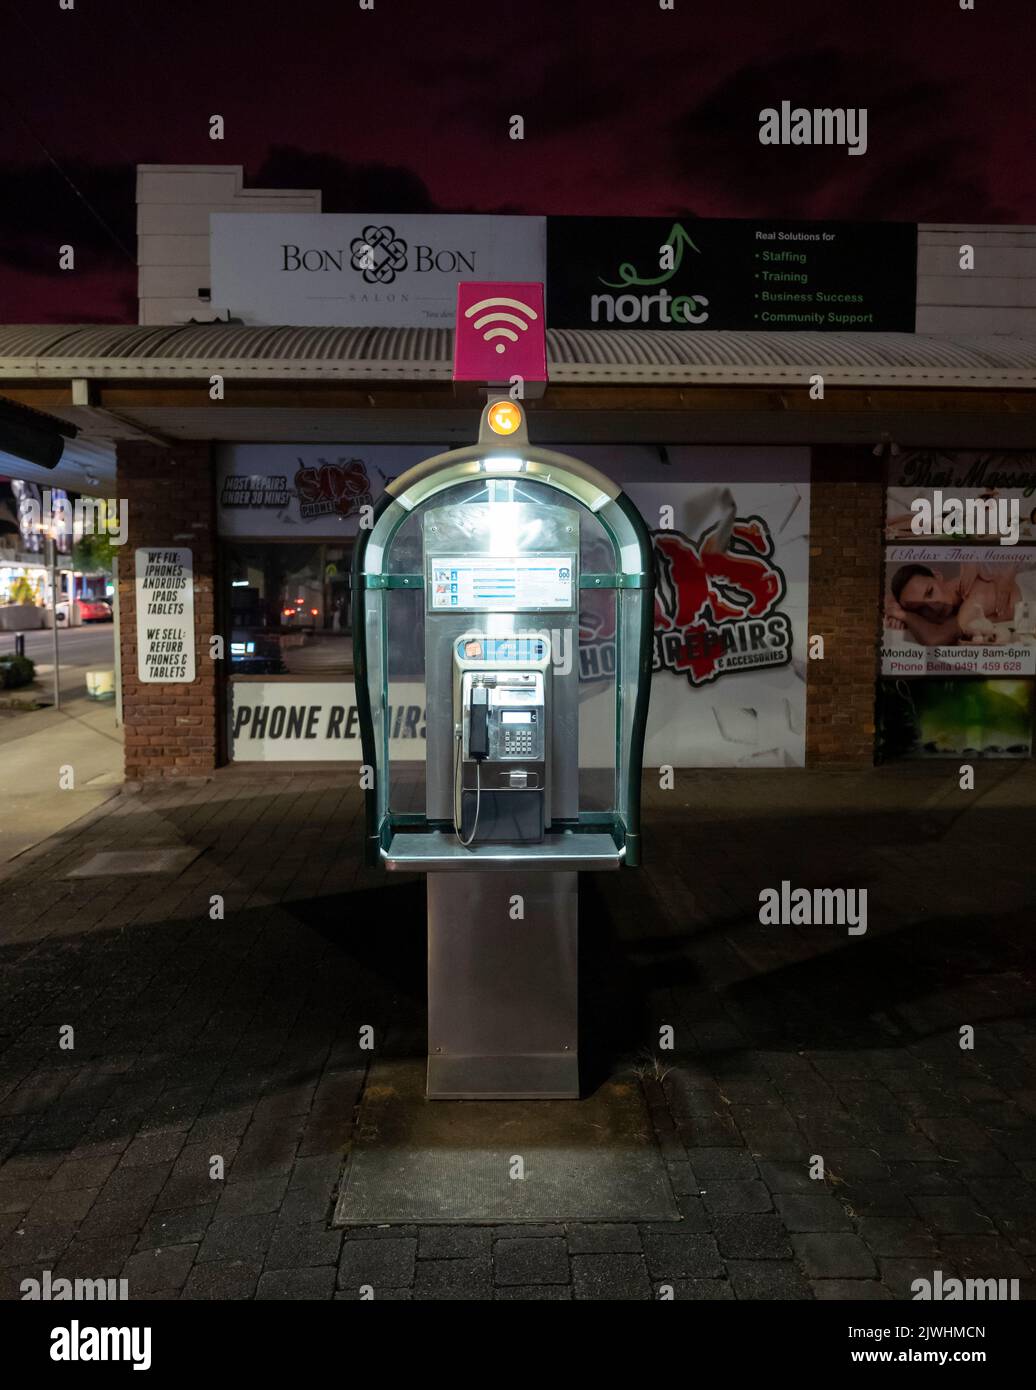 Telstra public phone booth in Palm Court, Murwillumbah, northern new south wales, australia, taken at night Stock Photo